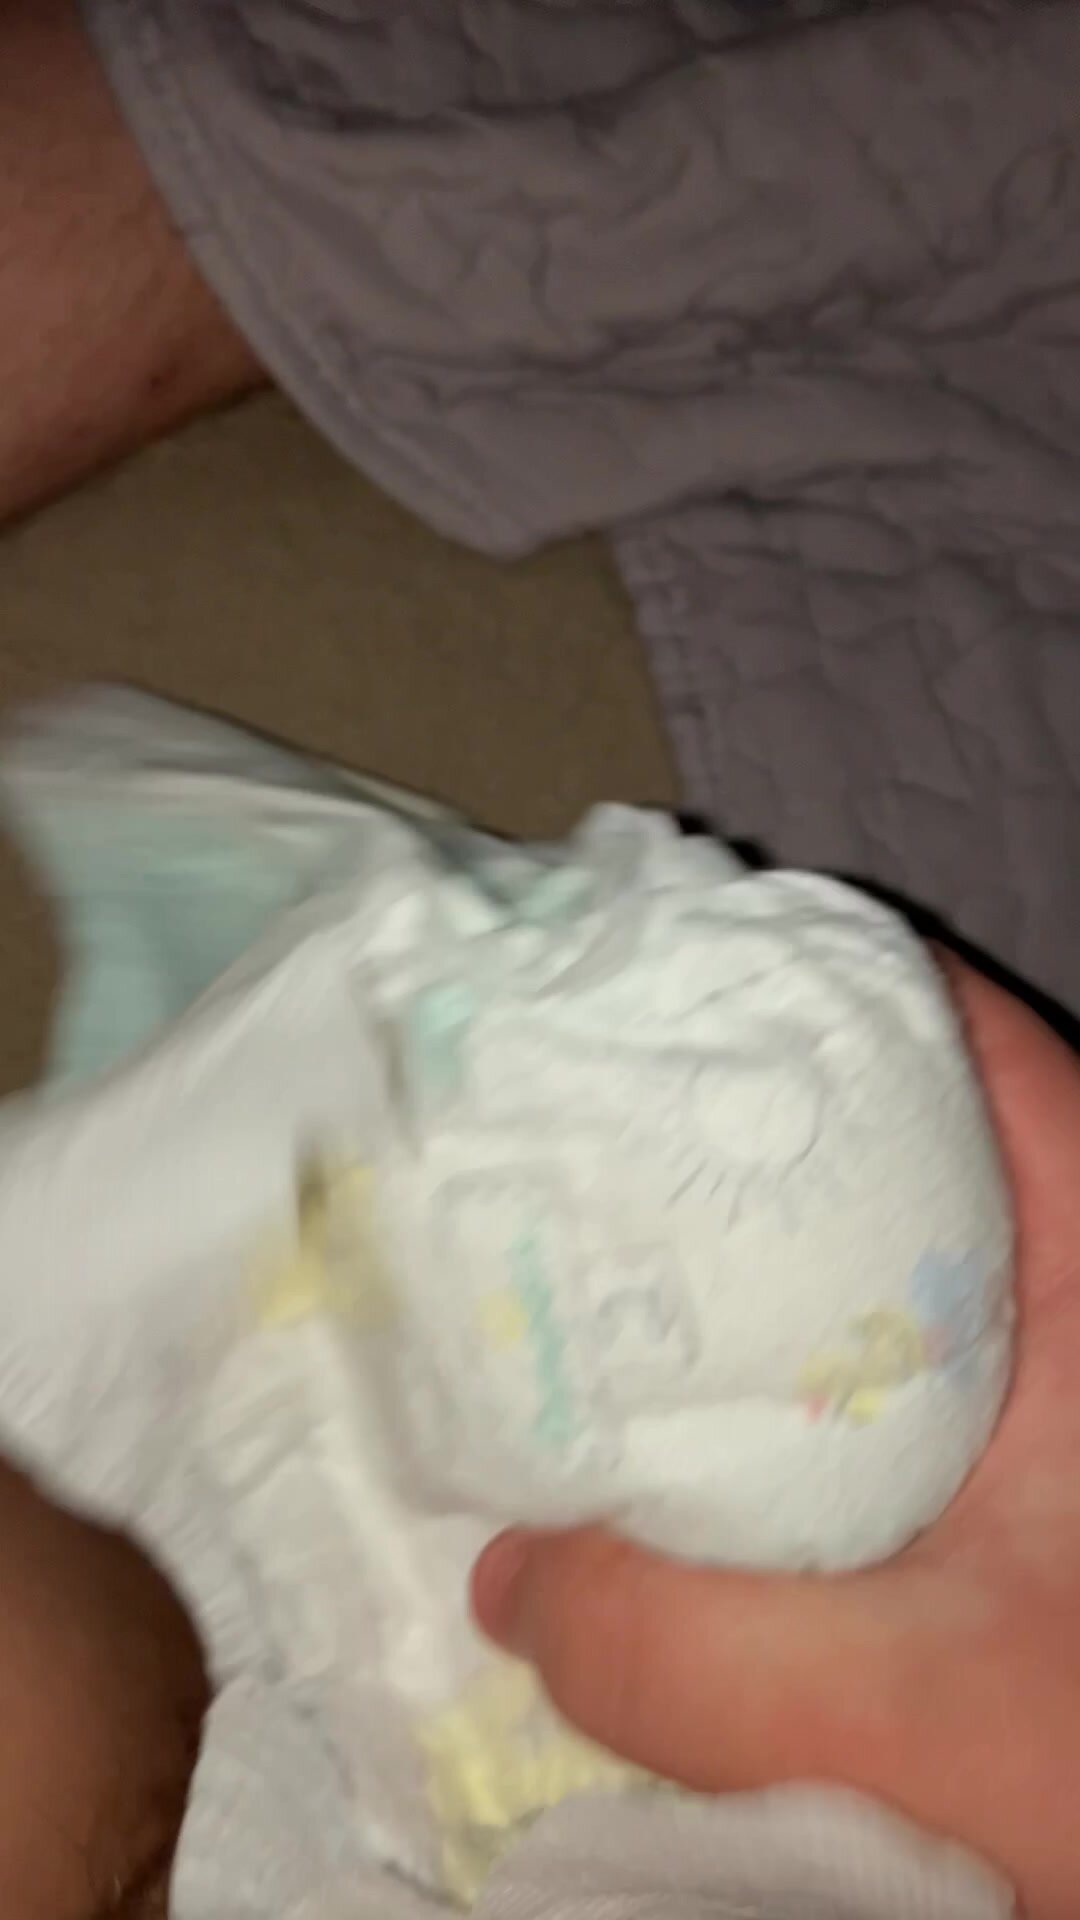 playing with used pampers i found in a daycare trashcan